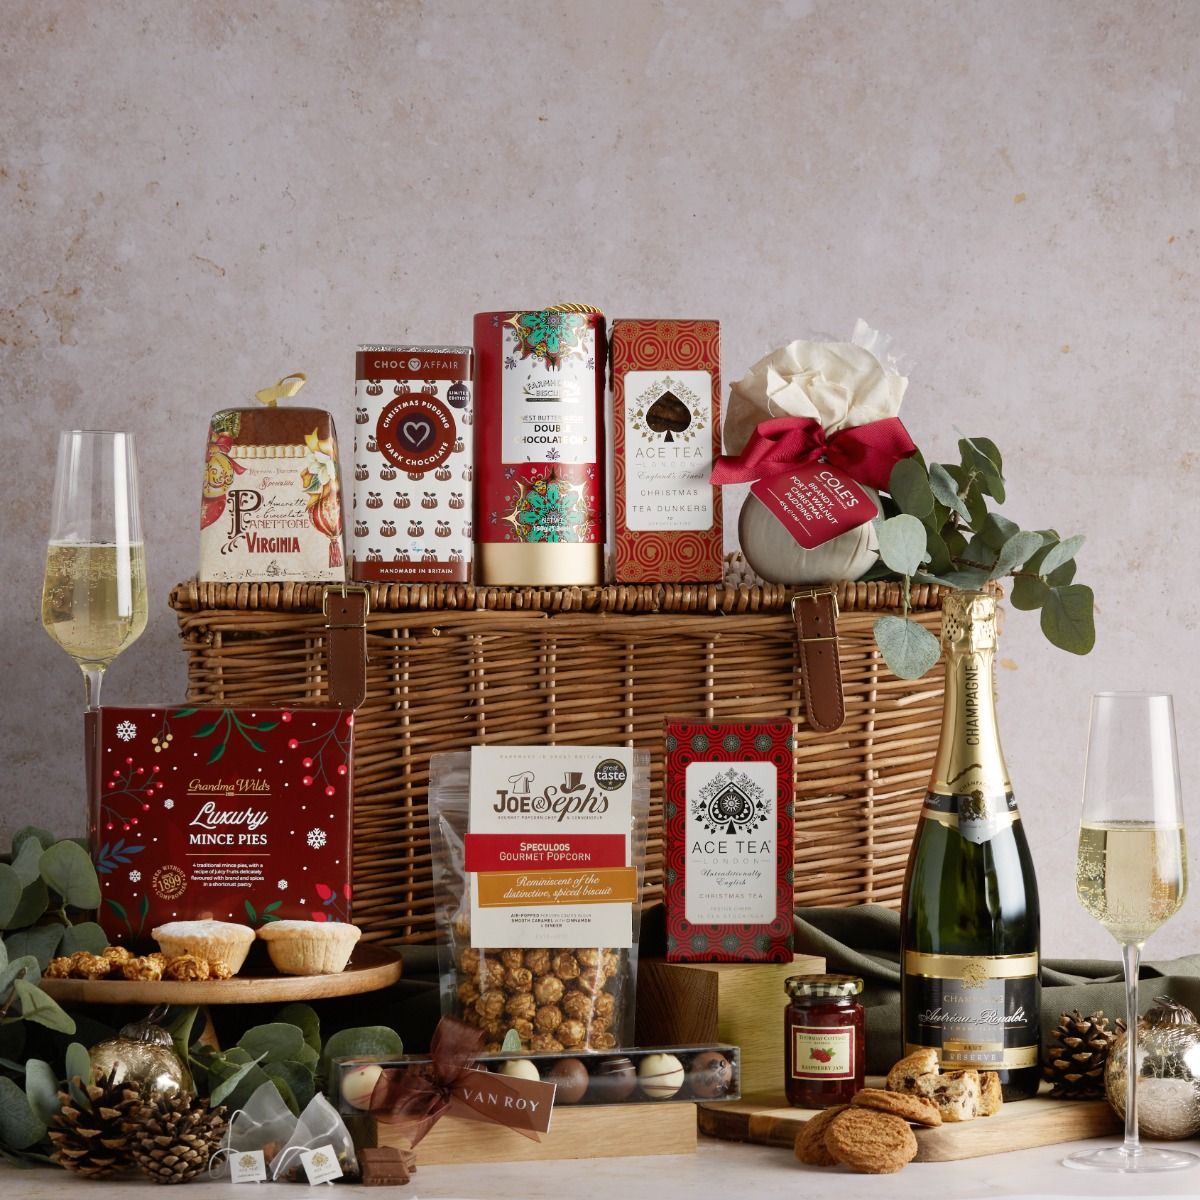 The luxury traditional Christmas hamper with contents on display and two glasses of Champagne with a wicker basket